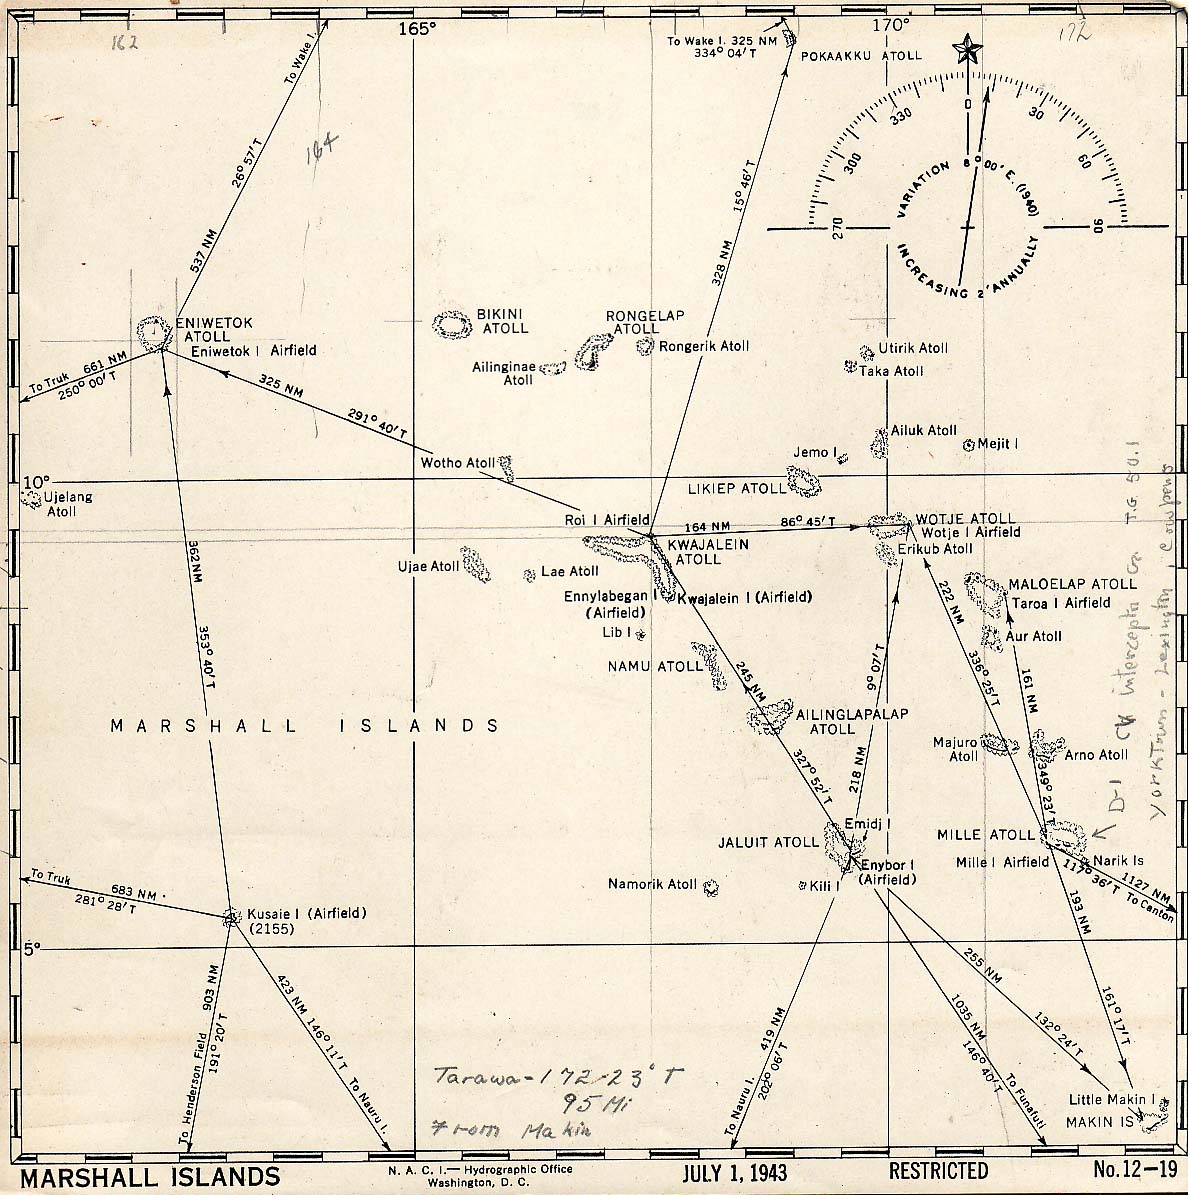 United States Hydrographic Office July 1943 map of the Marshall Islands showing distances and bearings between major island groups.